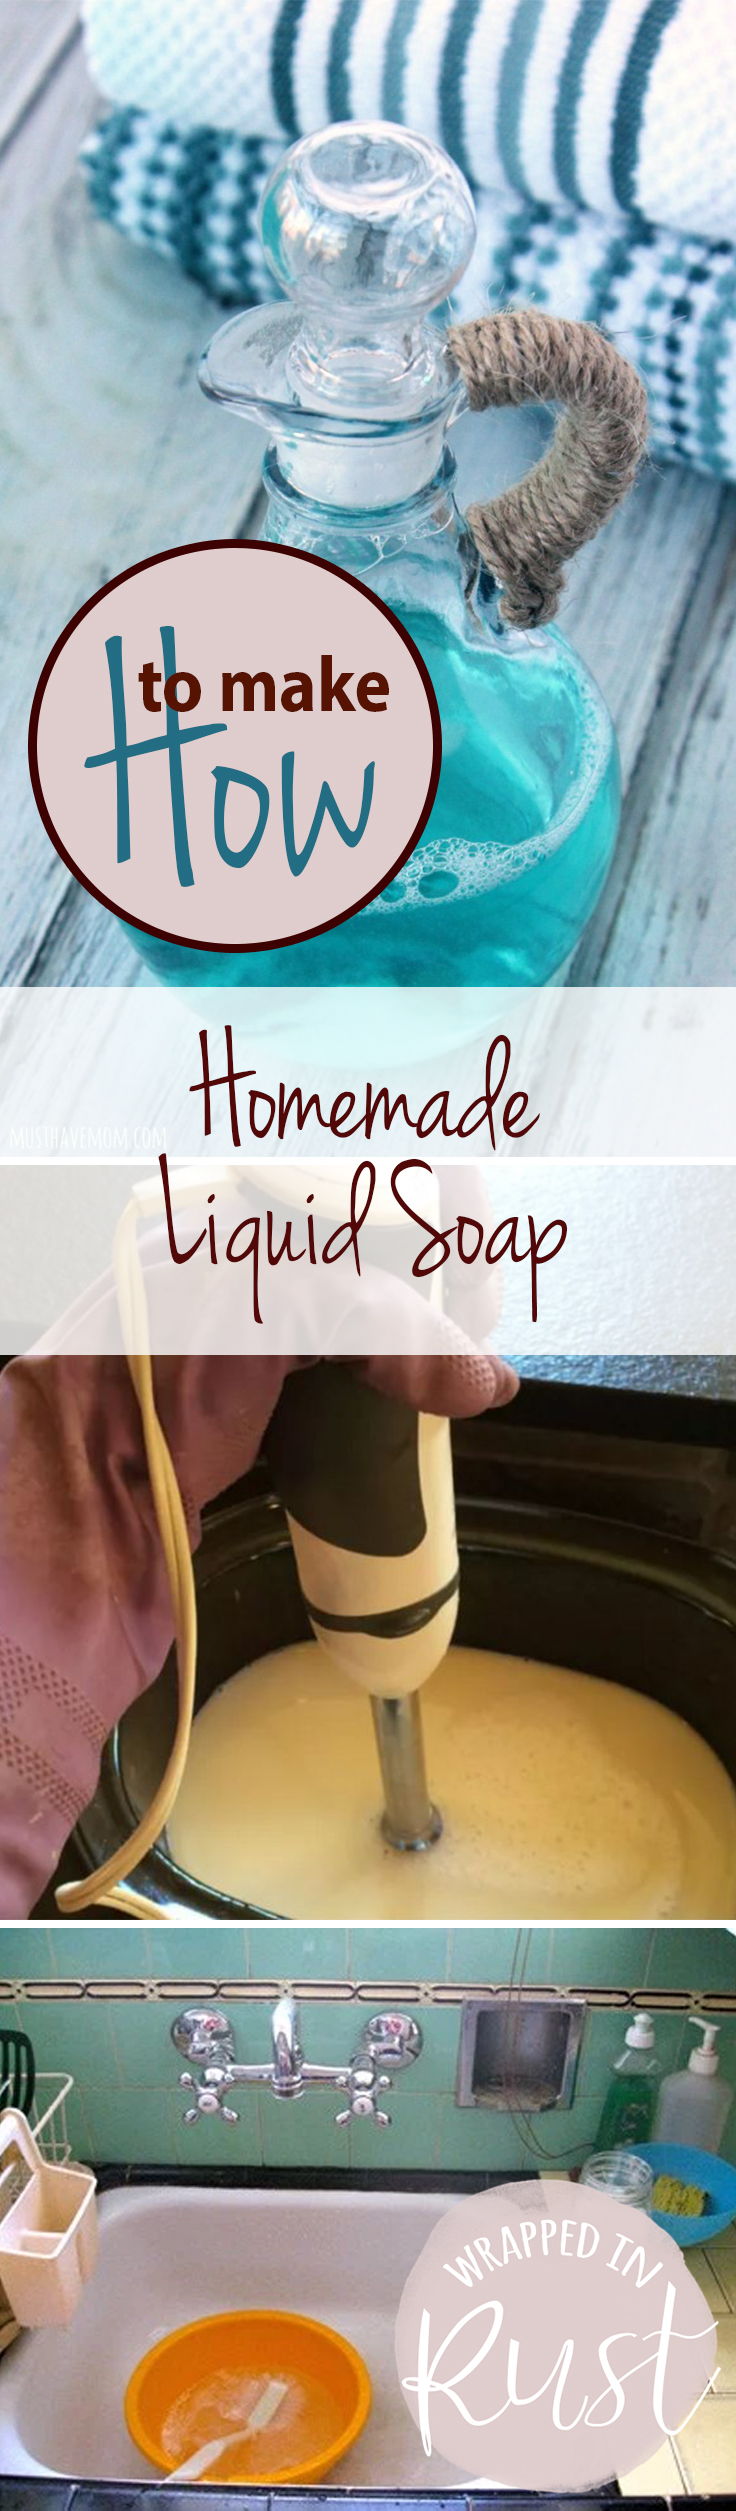 Homemade Liquid Soap, Homemade Products, Natural Cleaning Products, Natural Cleaning, How to Make Soap, How to Make Soap, Easy Soap Recipes, Popular Pin. 